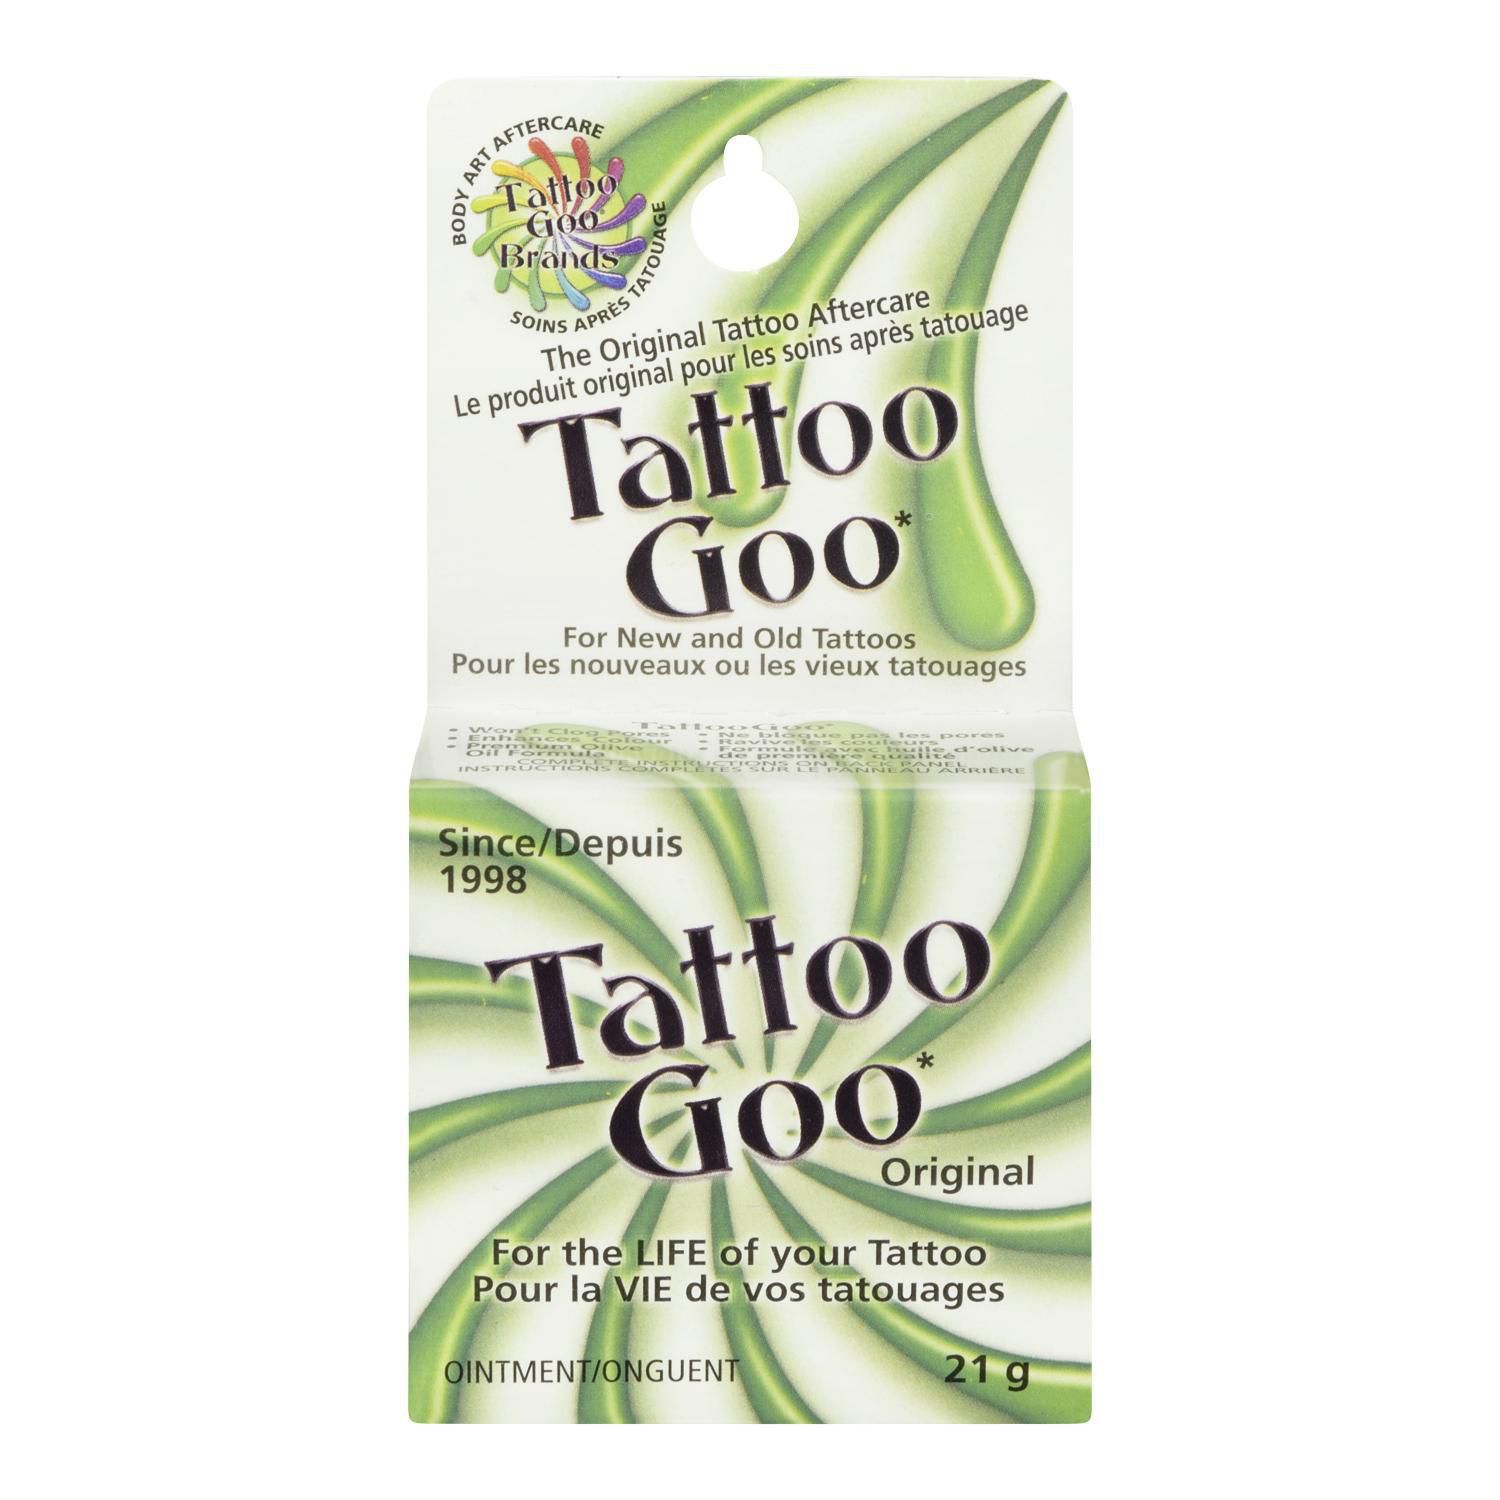 Favourite aftercare lotions? : r/tattooadvice